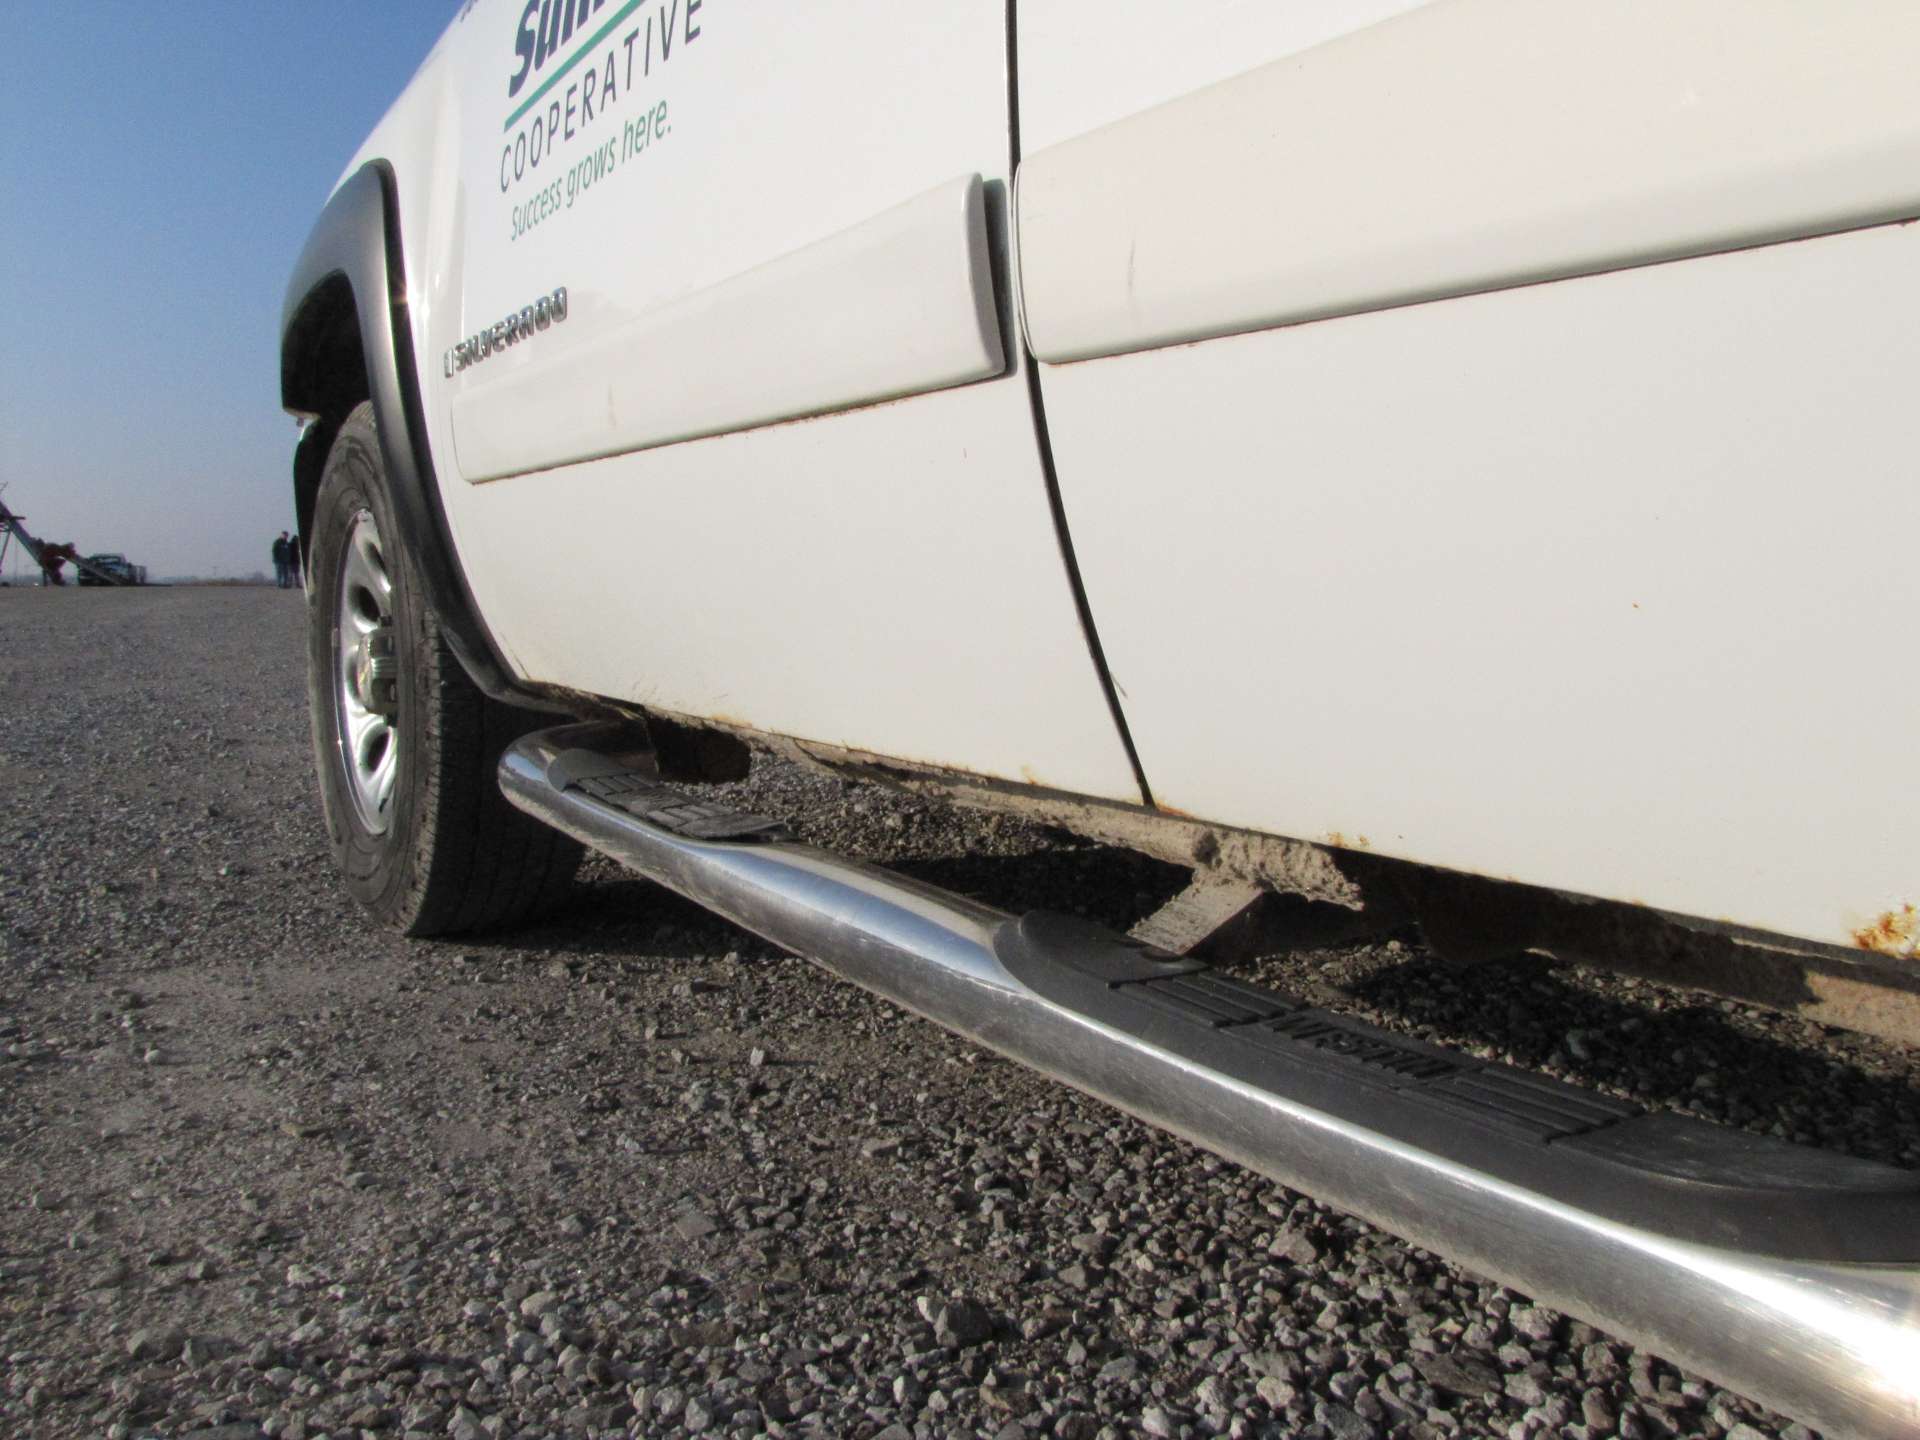 2008 Chevy Silverado 1500 LT Pickup Truck (CRACKED FRAME) - Image 16 of 43